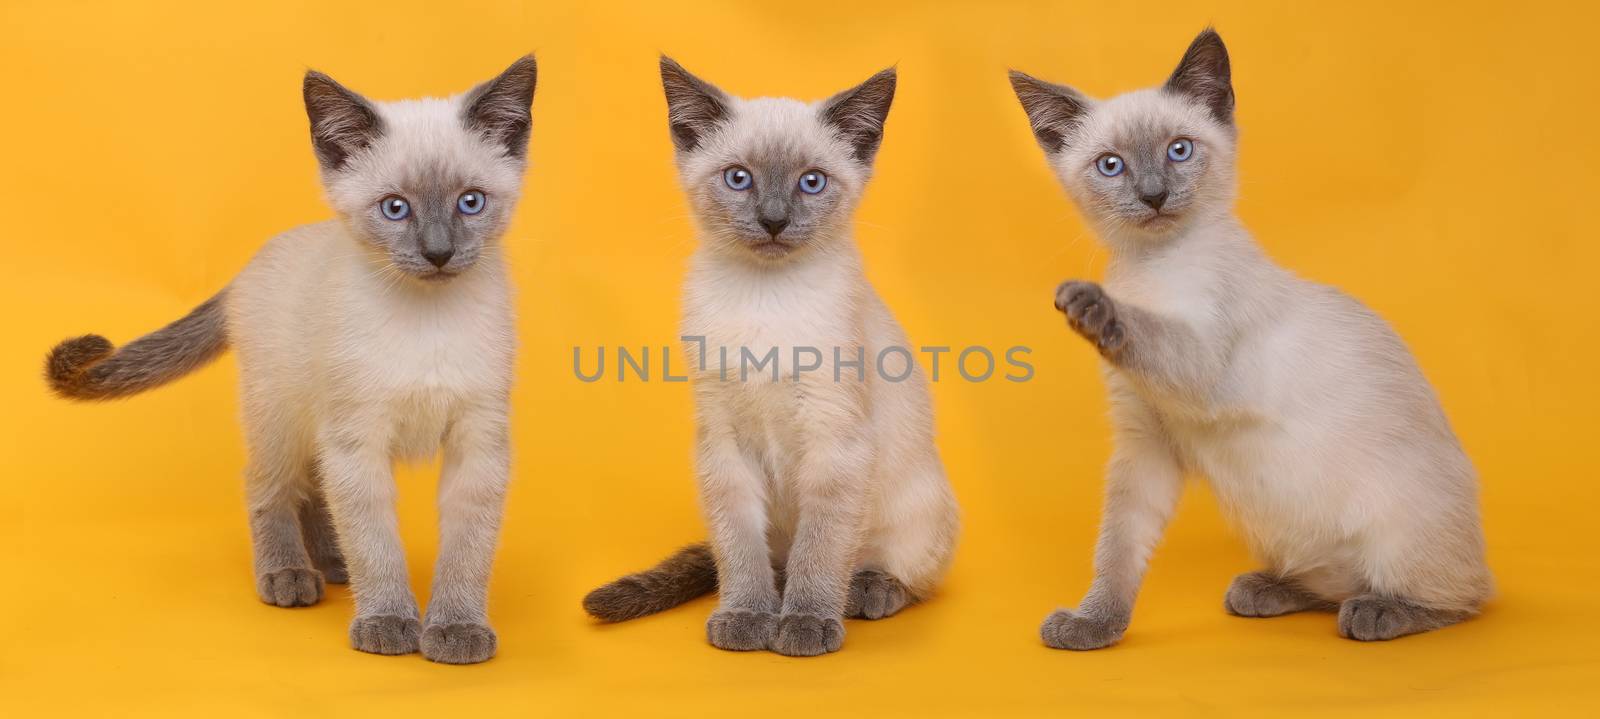 Siamese Kittens on Bright Colorful Background by tobkatrina